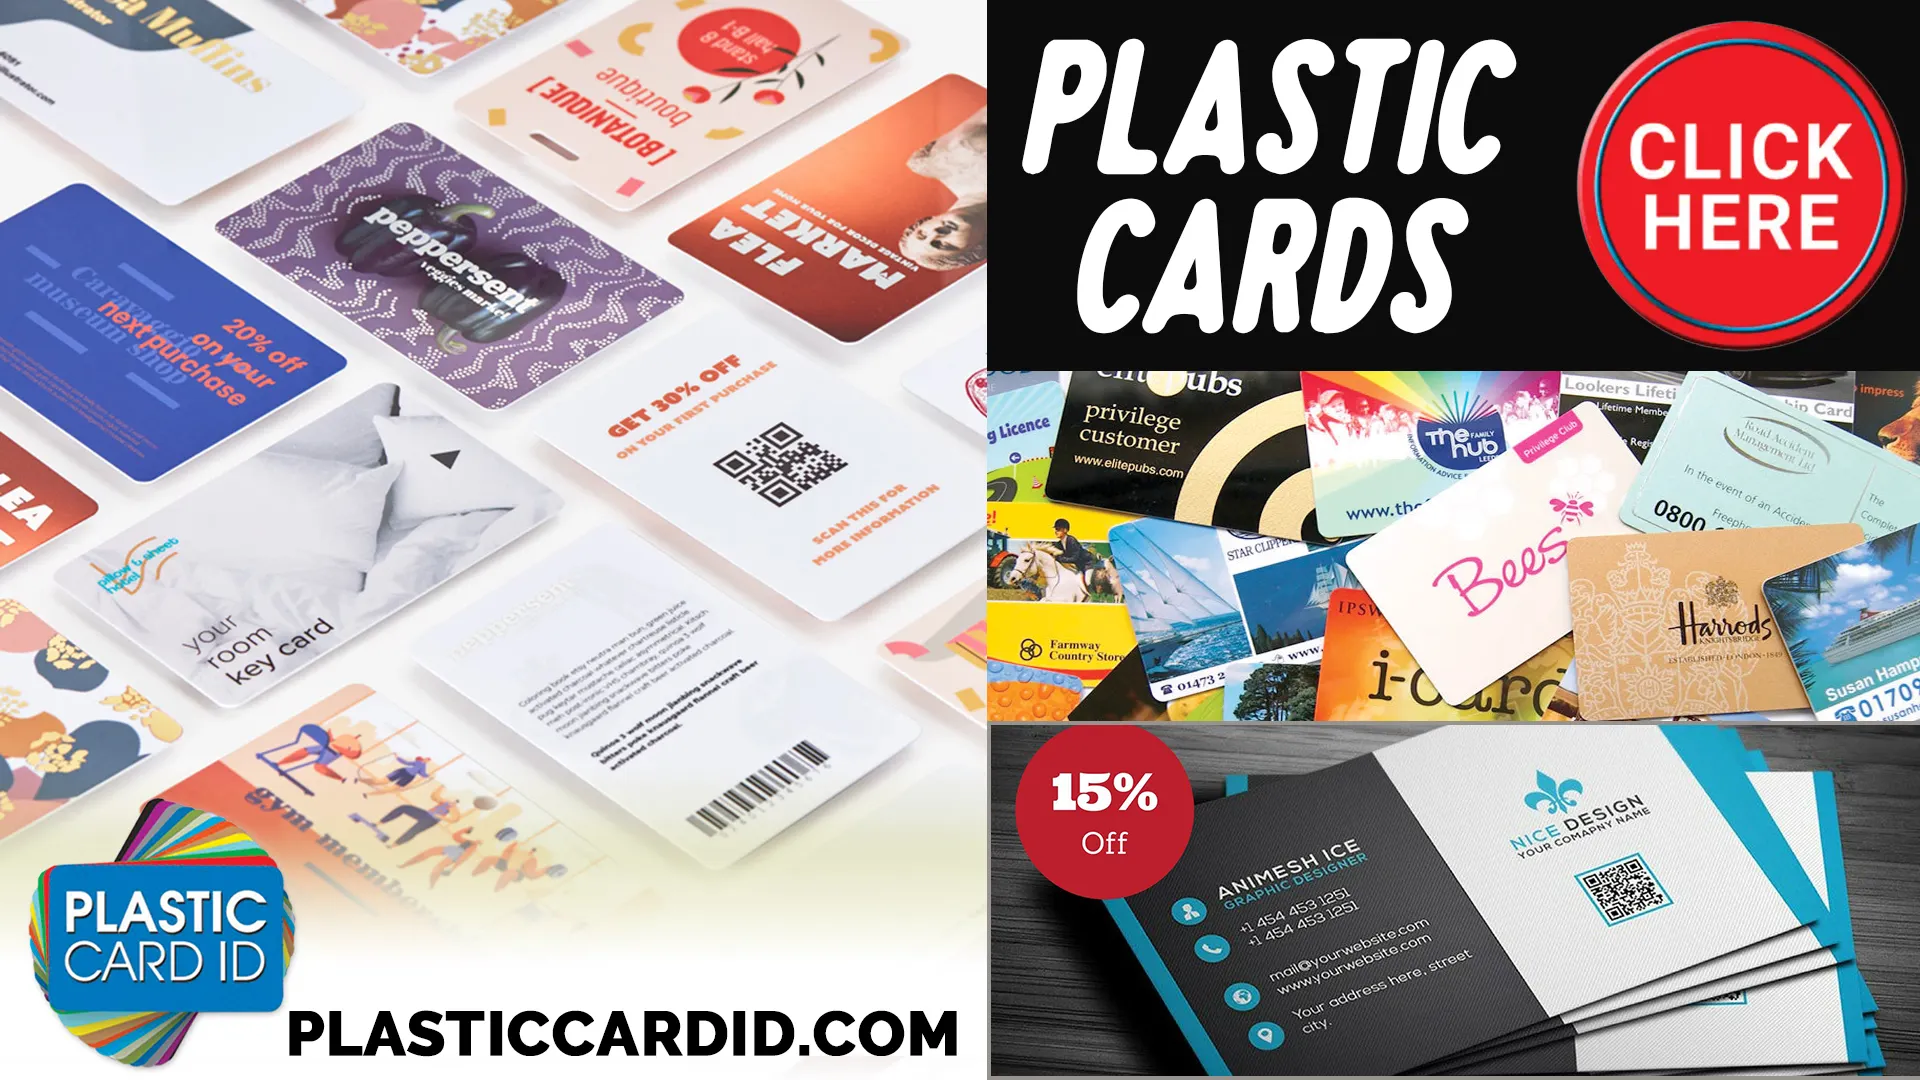 The Technology Behind Plastic Card ID




